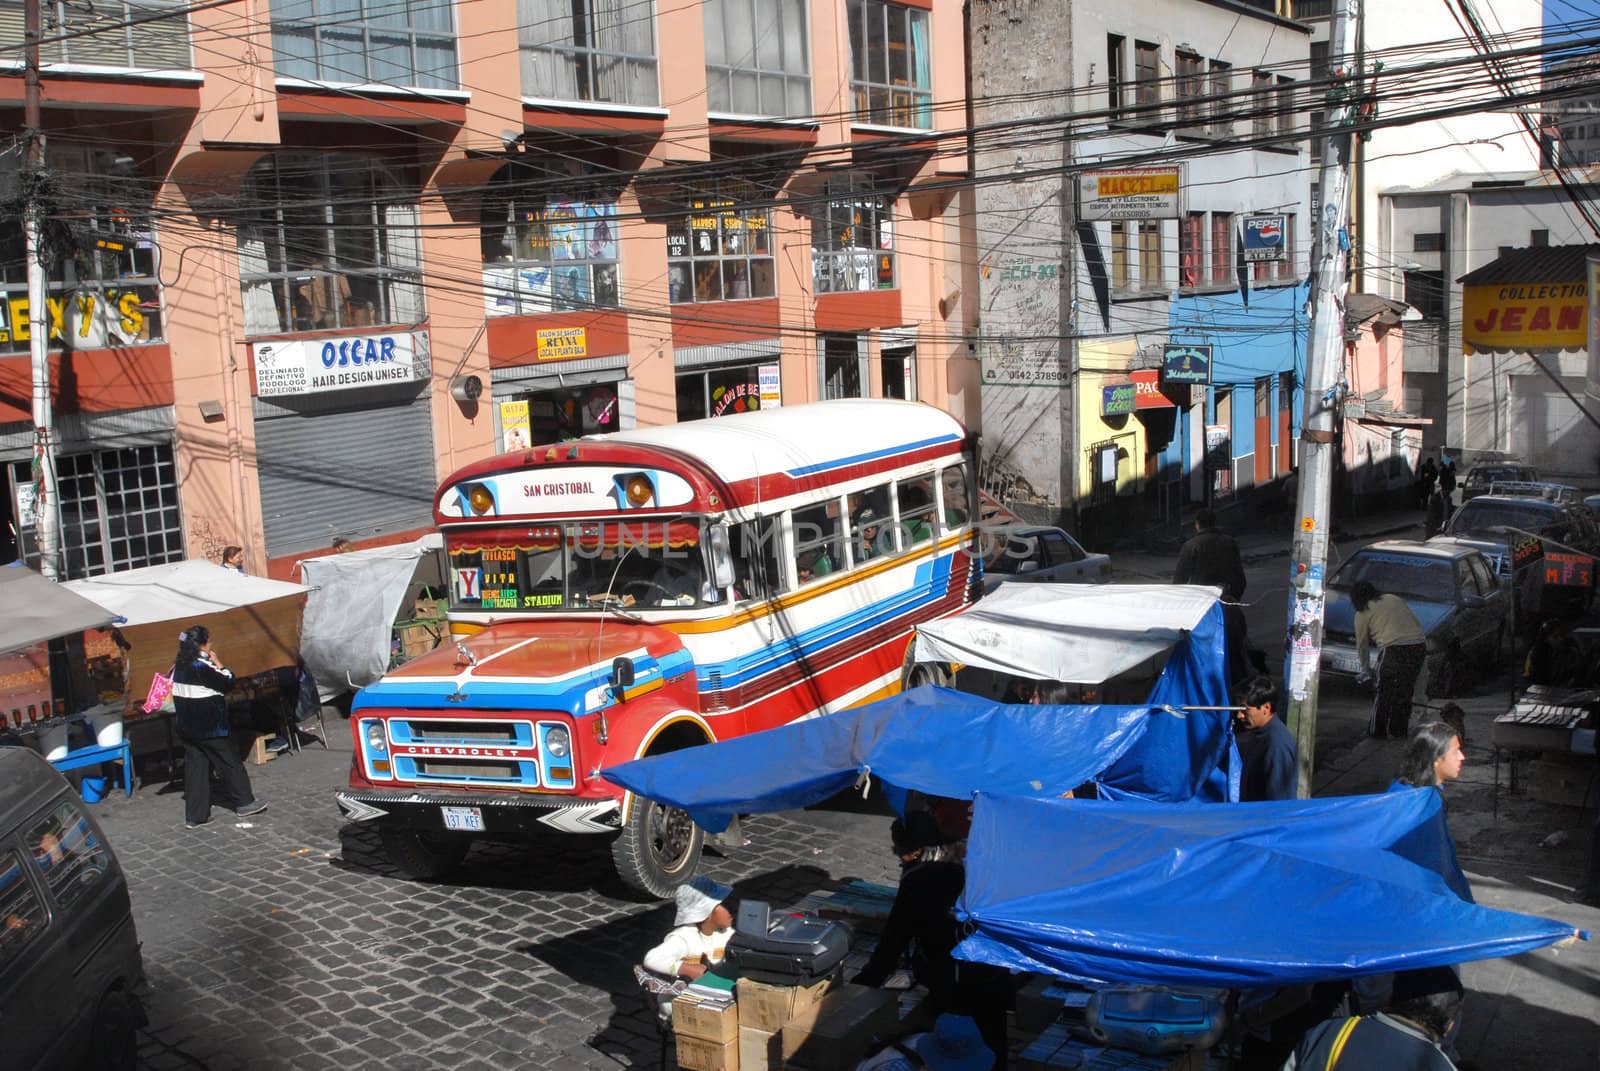 La Paz, Bolivia in June, 17 2006. Traditional means of transport in the city La Paz. The buses for the transportation of persons are colorful and cheerful